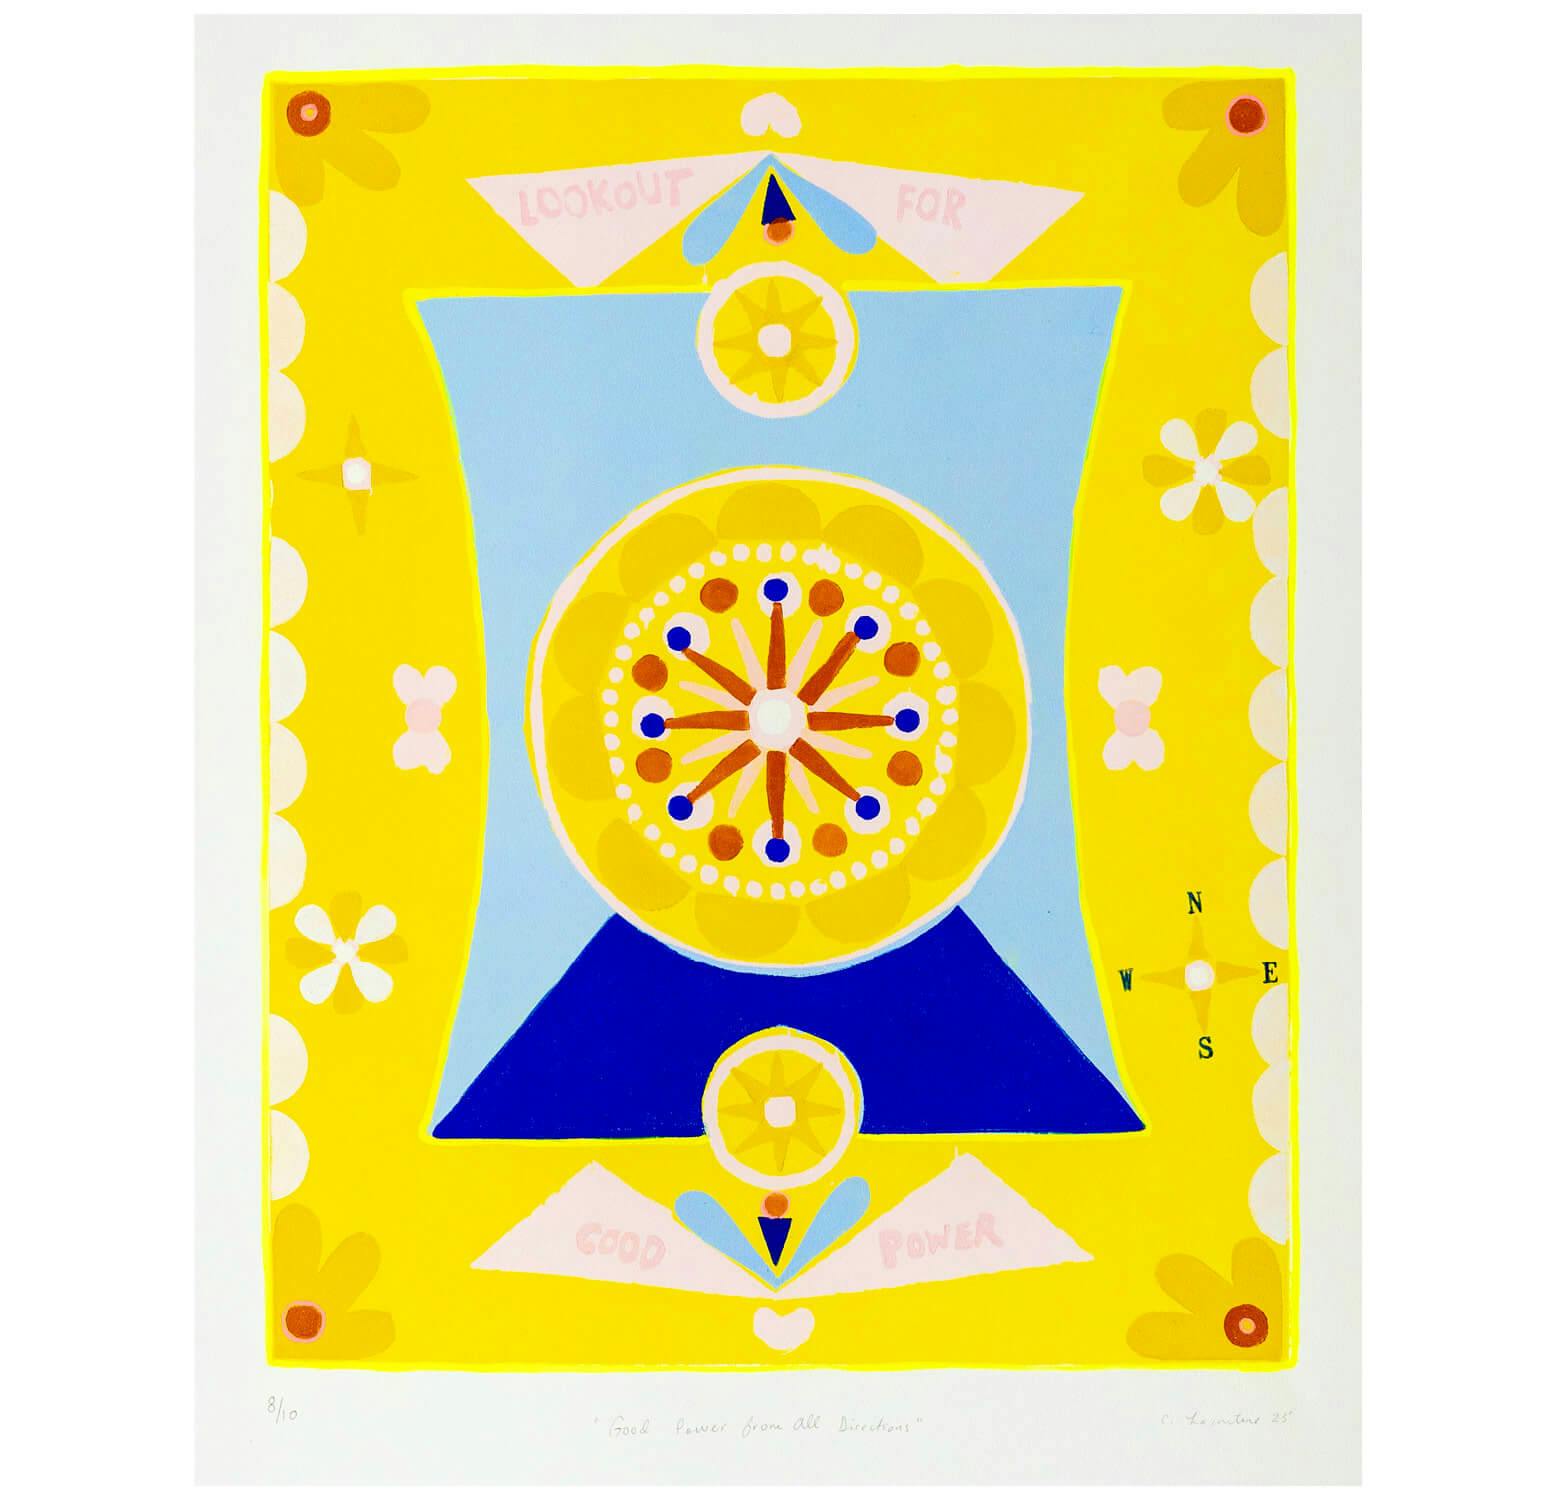 Brightly colored, yellow and blue artwork from Crystalle Lacouture.